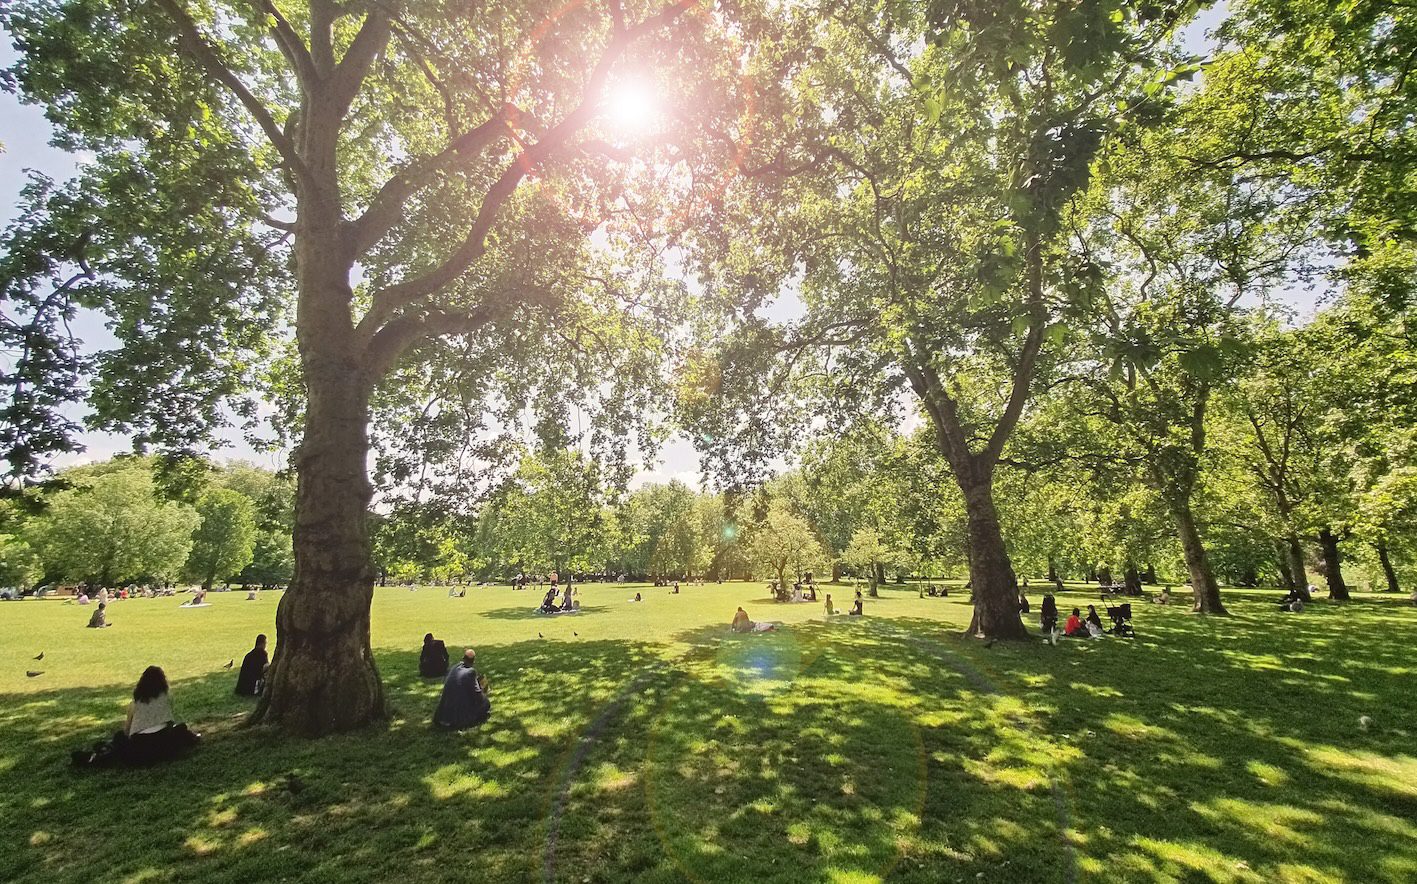 People sitting on the grass in Green Park in London as the sun shines through the trees